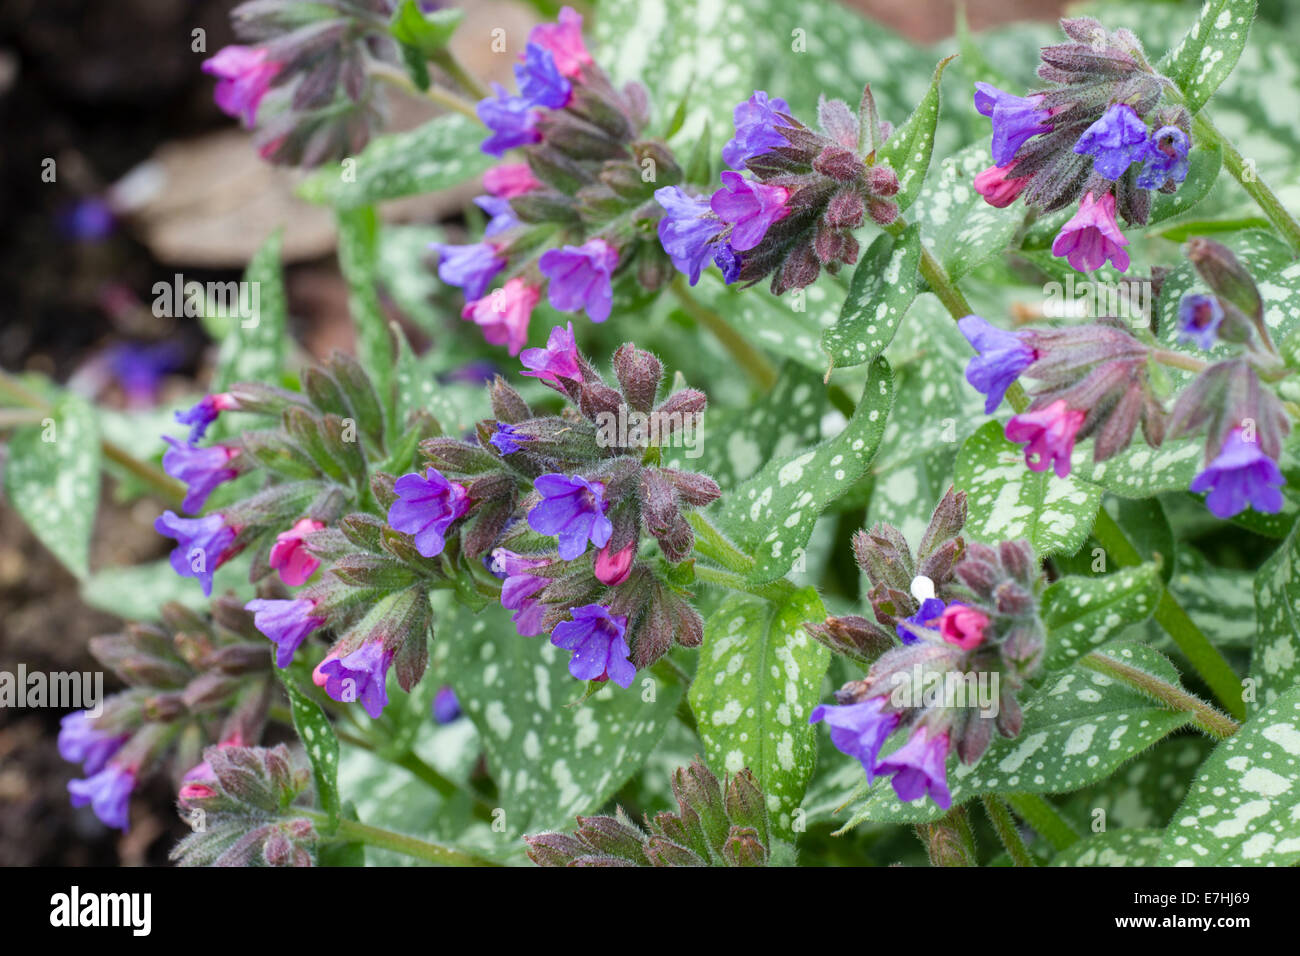 Early spring flowers and spotted leaves of the lungwort, Pulmonaria saccharata 'Trevi Fountain' Stock Photo